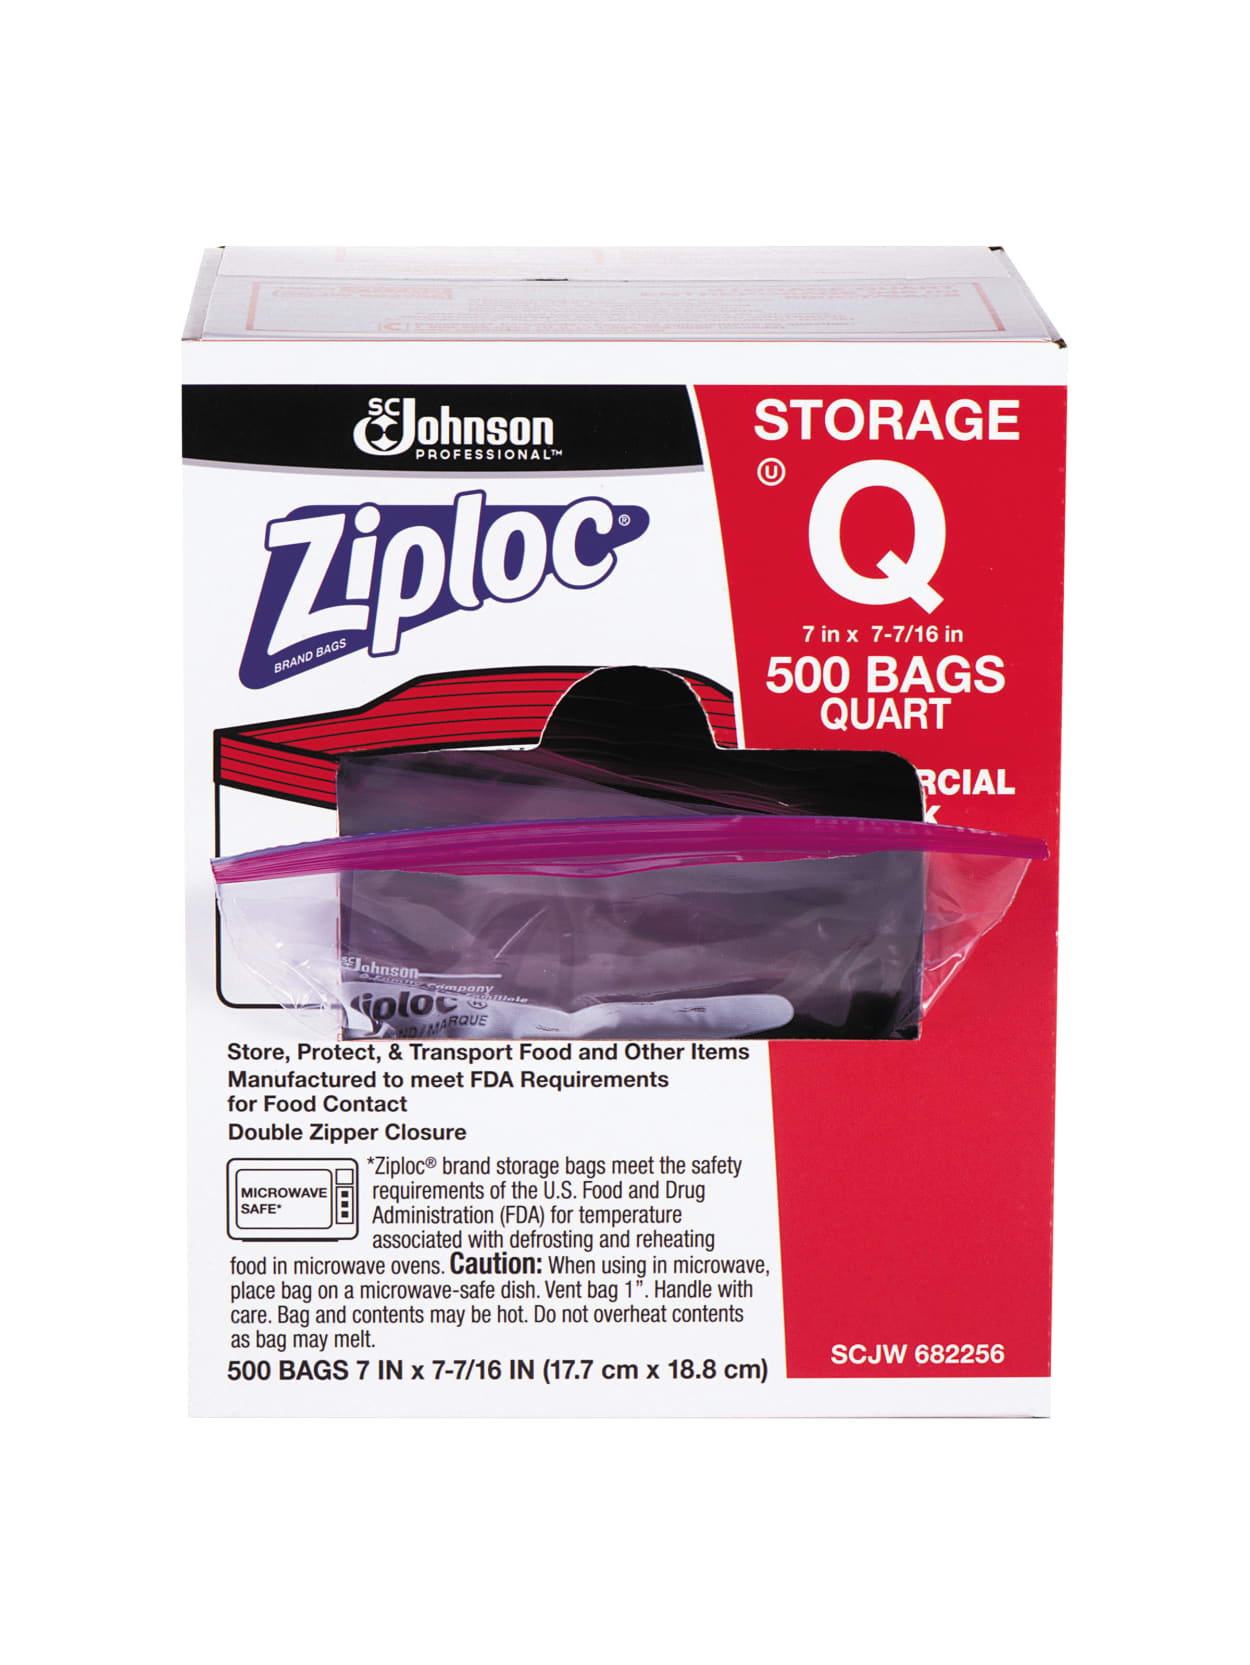 plastic storage bags with zippers